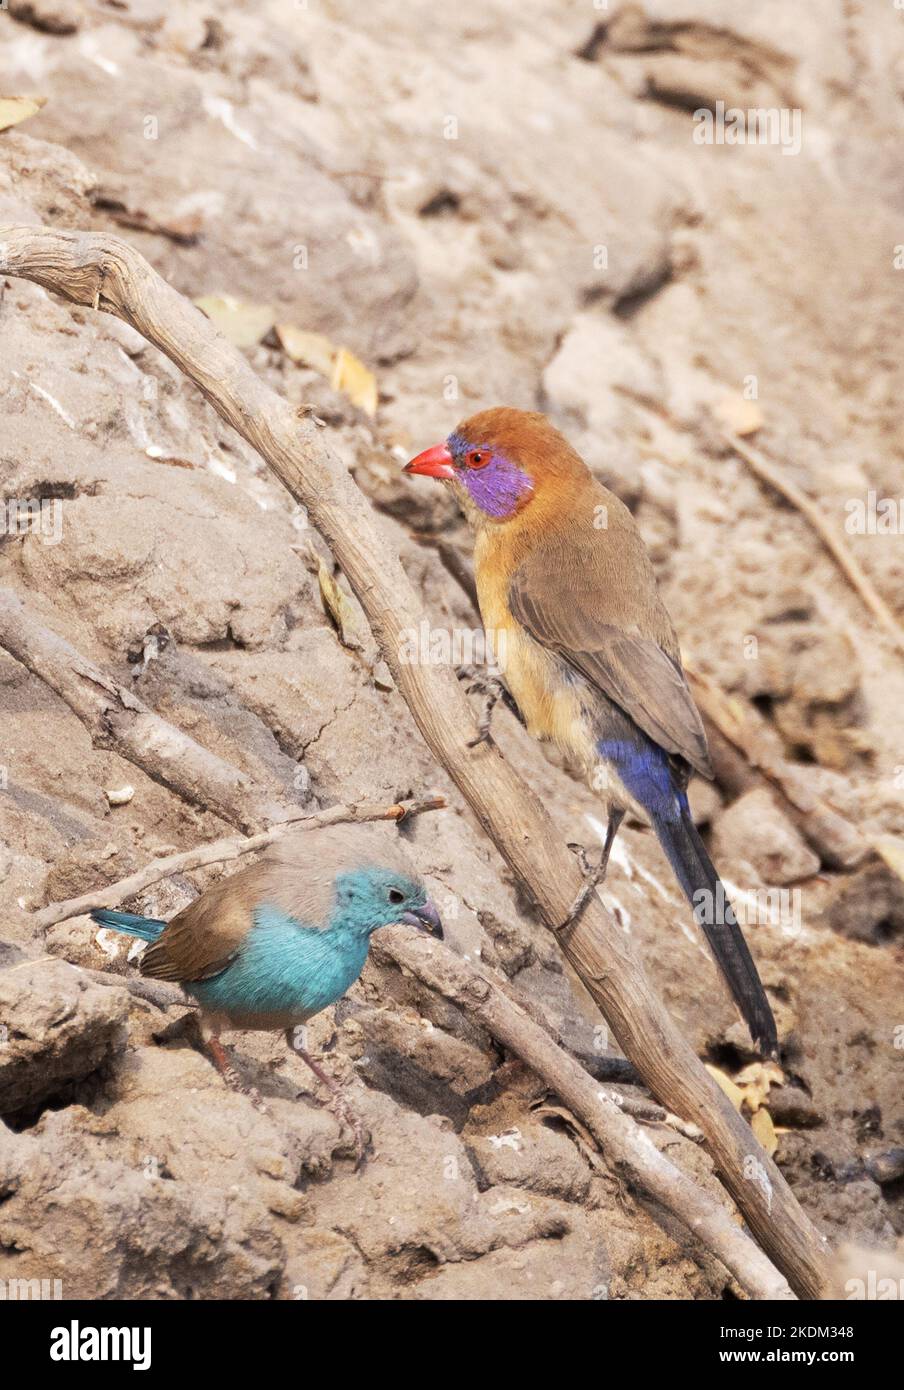 Colourful birds Africa. Chobe National Park, Botswana Africa. Juvenile Blue Waxbill (left), and female Violet Eared Waxbill (right). Stock Photo